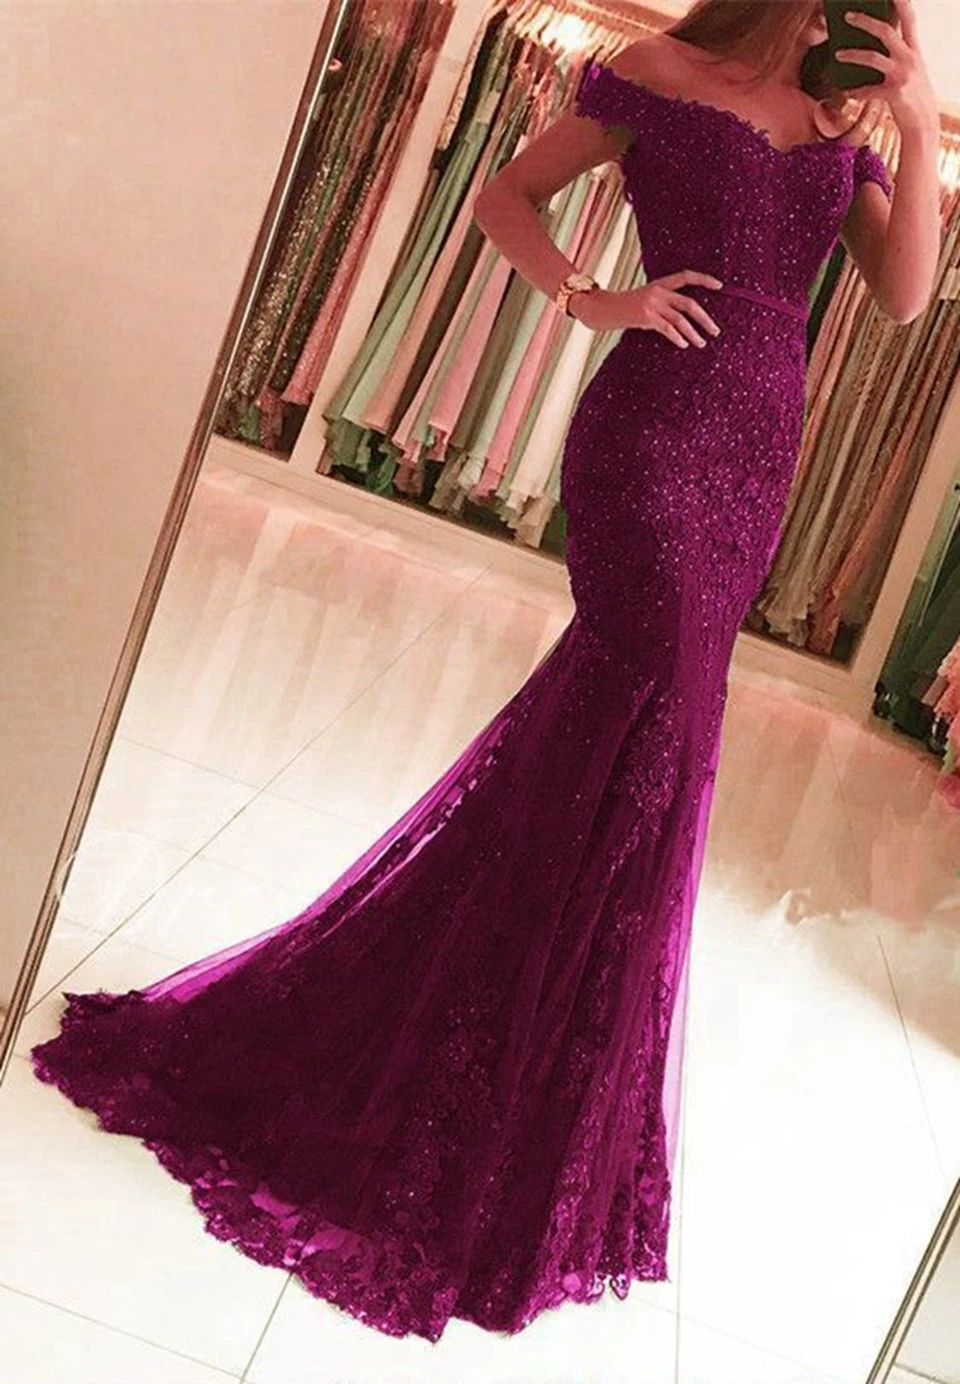 petite formal dresses & gowns Burgundy Mermaid Evening Dresses 2022 Women Appliques Lace Formal Party Night Sexy Prom Dress Off Shoulder Long Robe De Soiree petite formal dresses